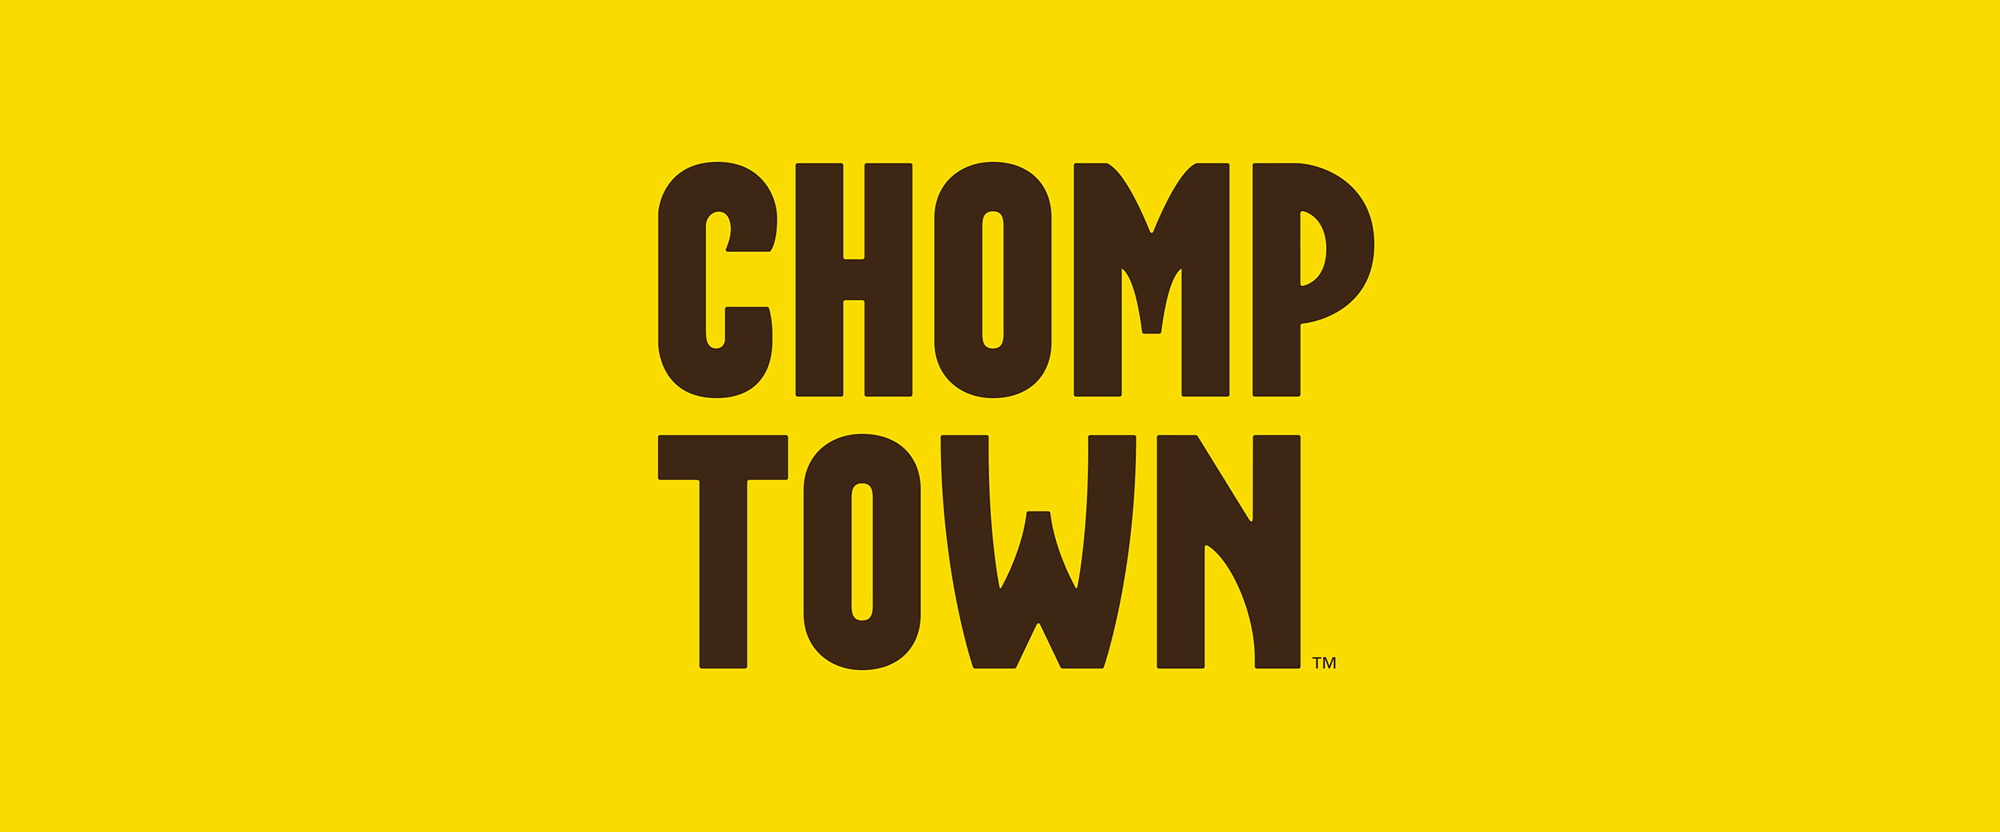 New Logo, Identity, and Packaging for Chomptown Cookies by Ptarmak